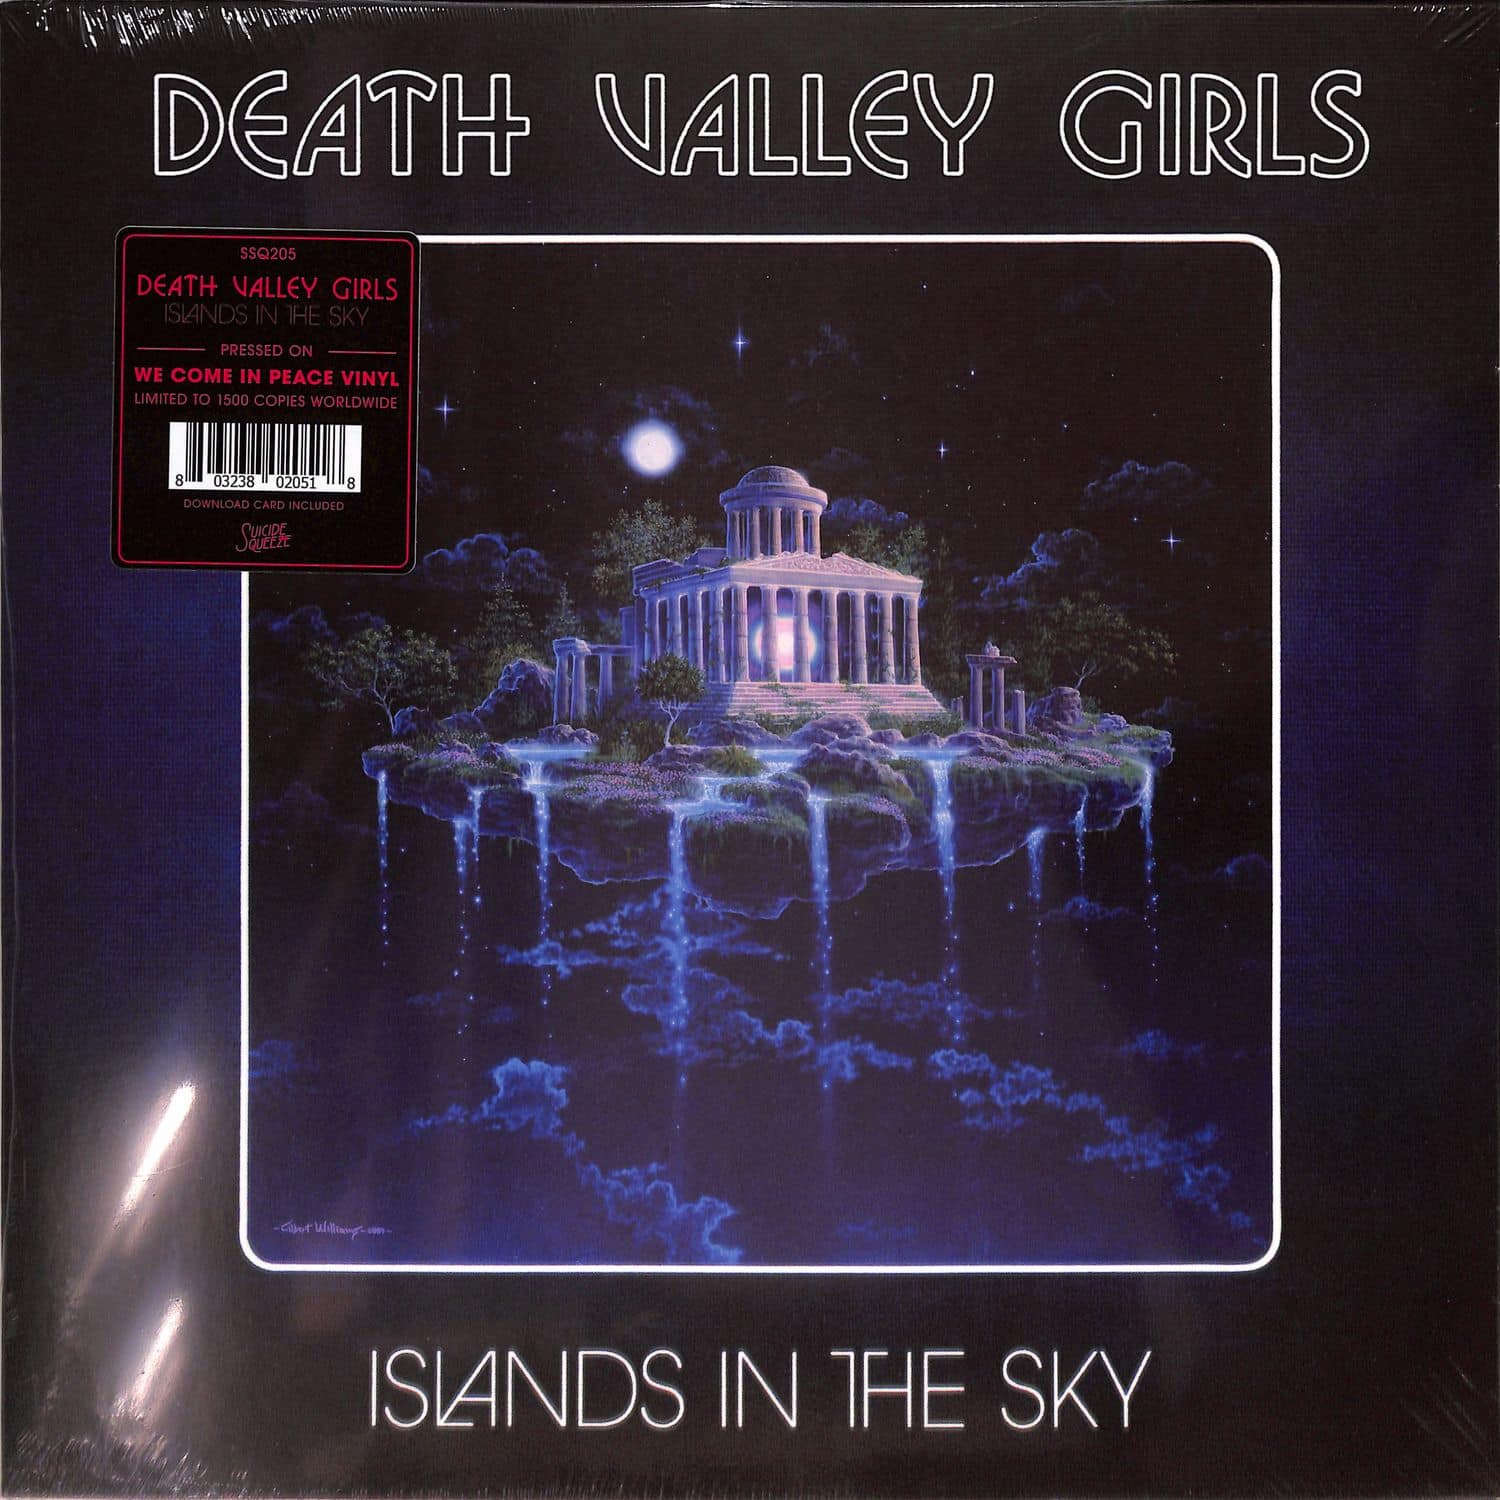 Death Valley Girls - ISLANDS IN THE SKY 